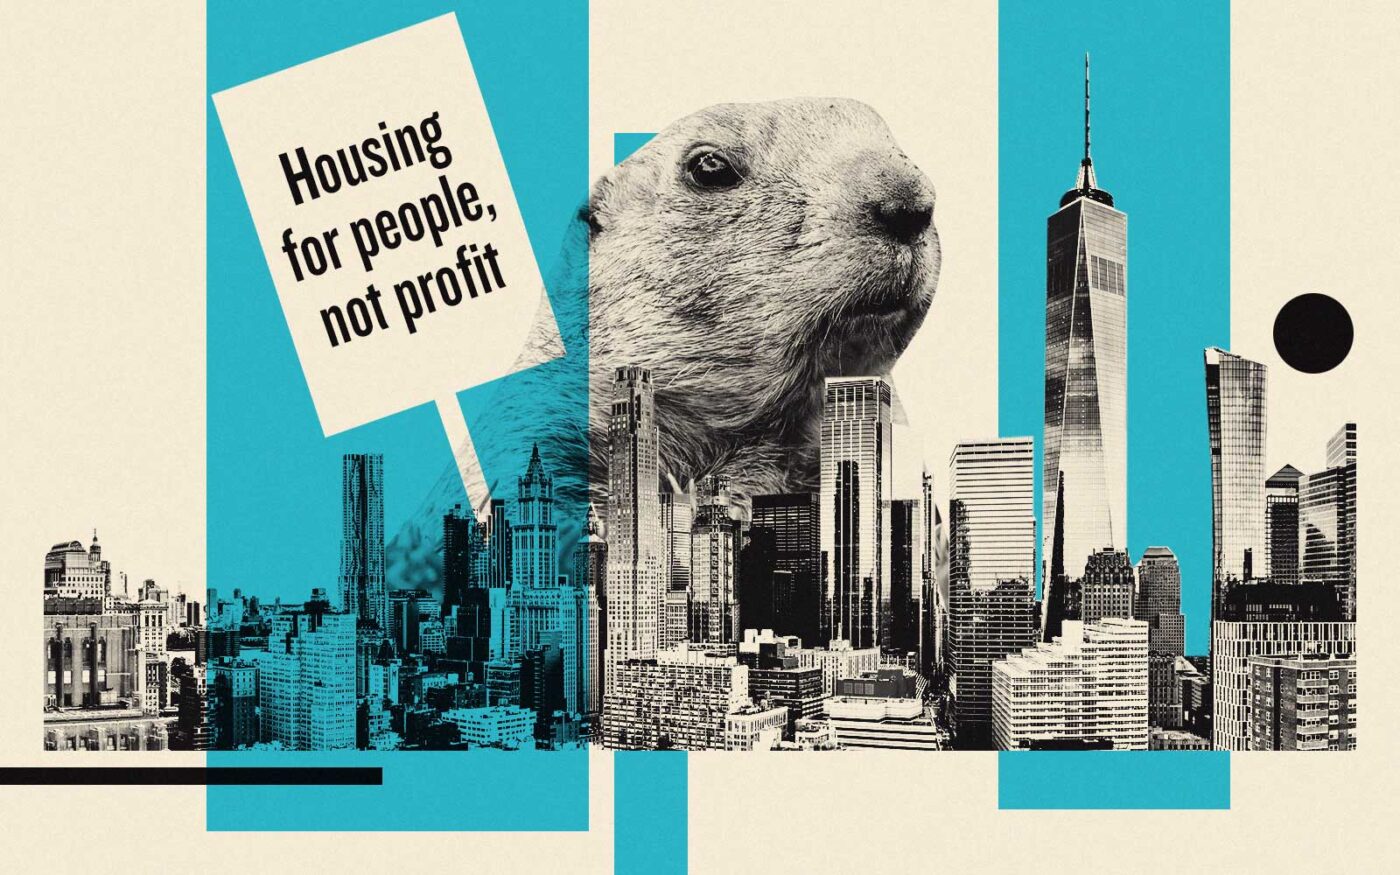 Groundhog Day in New York City: Housing Projects Falling Short